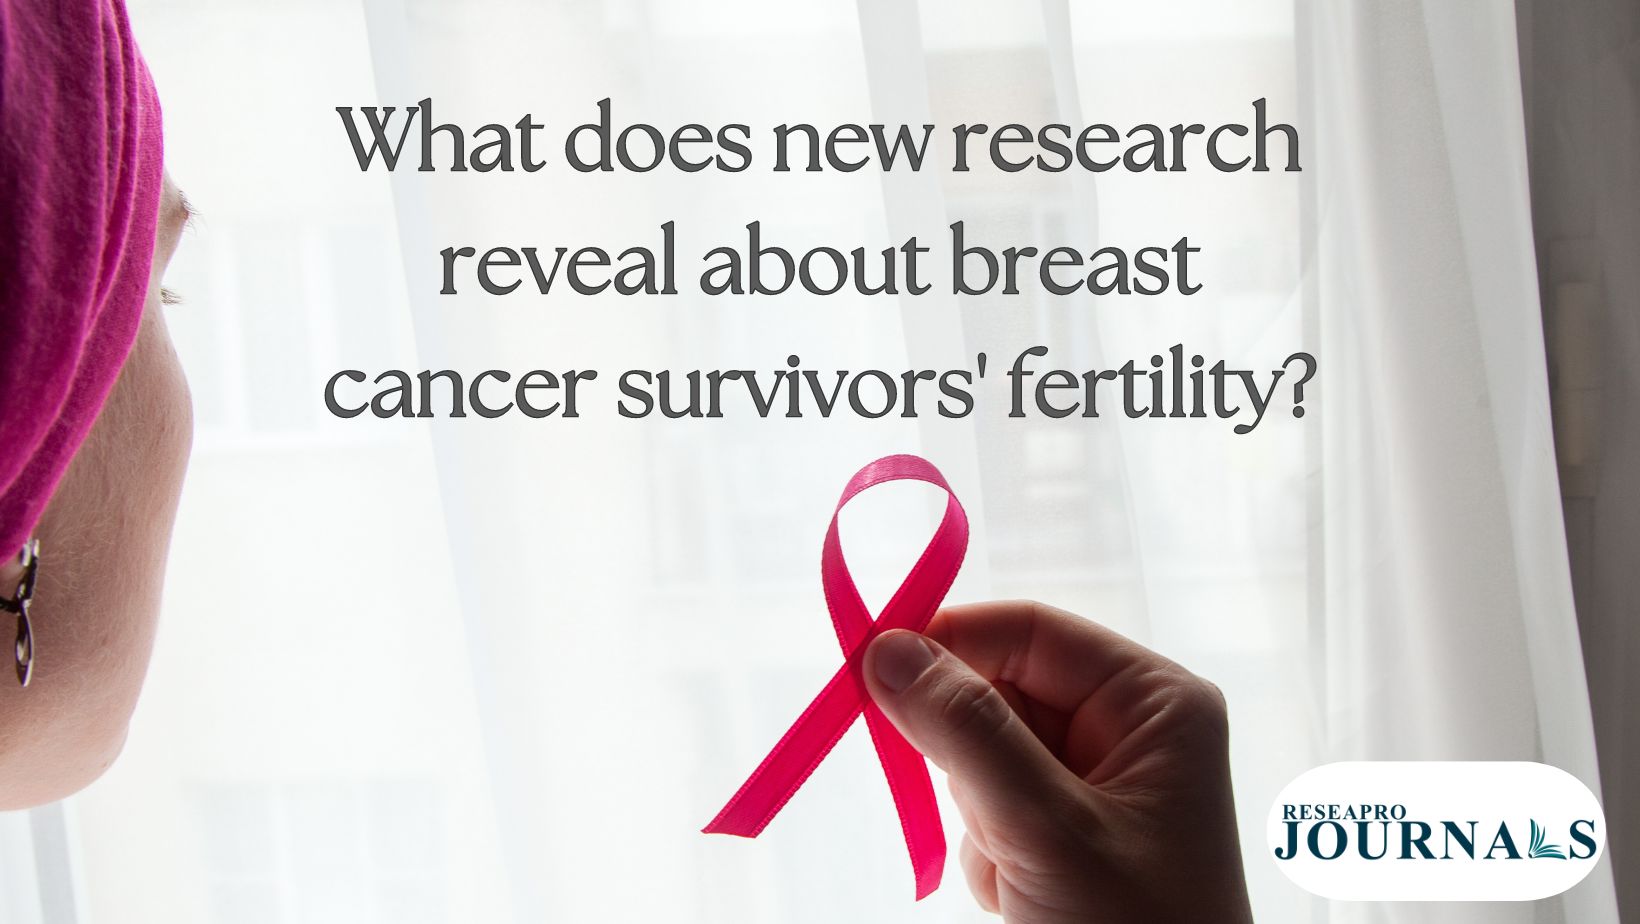 Breast cancer survivors can successfully have children, new study shows.